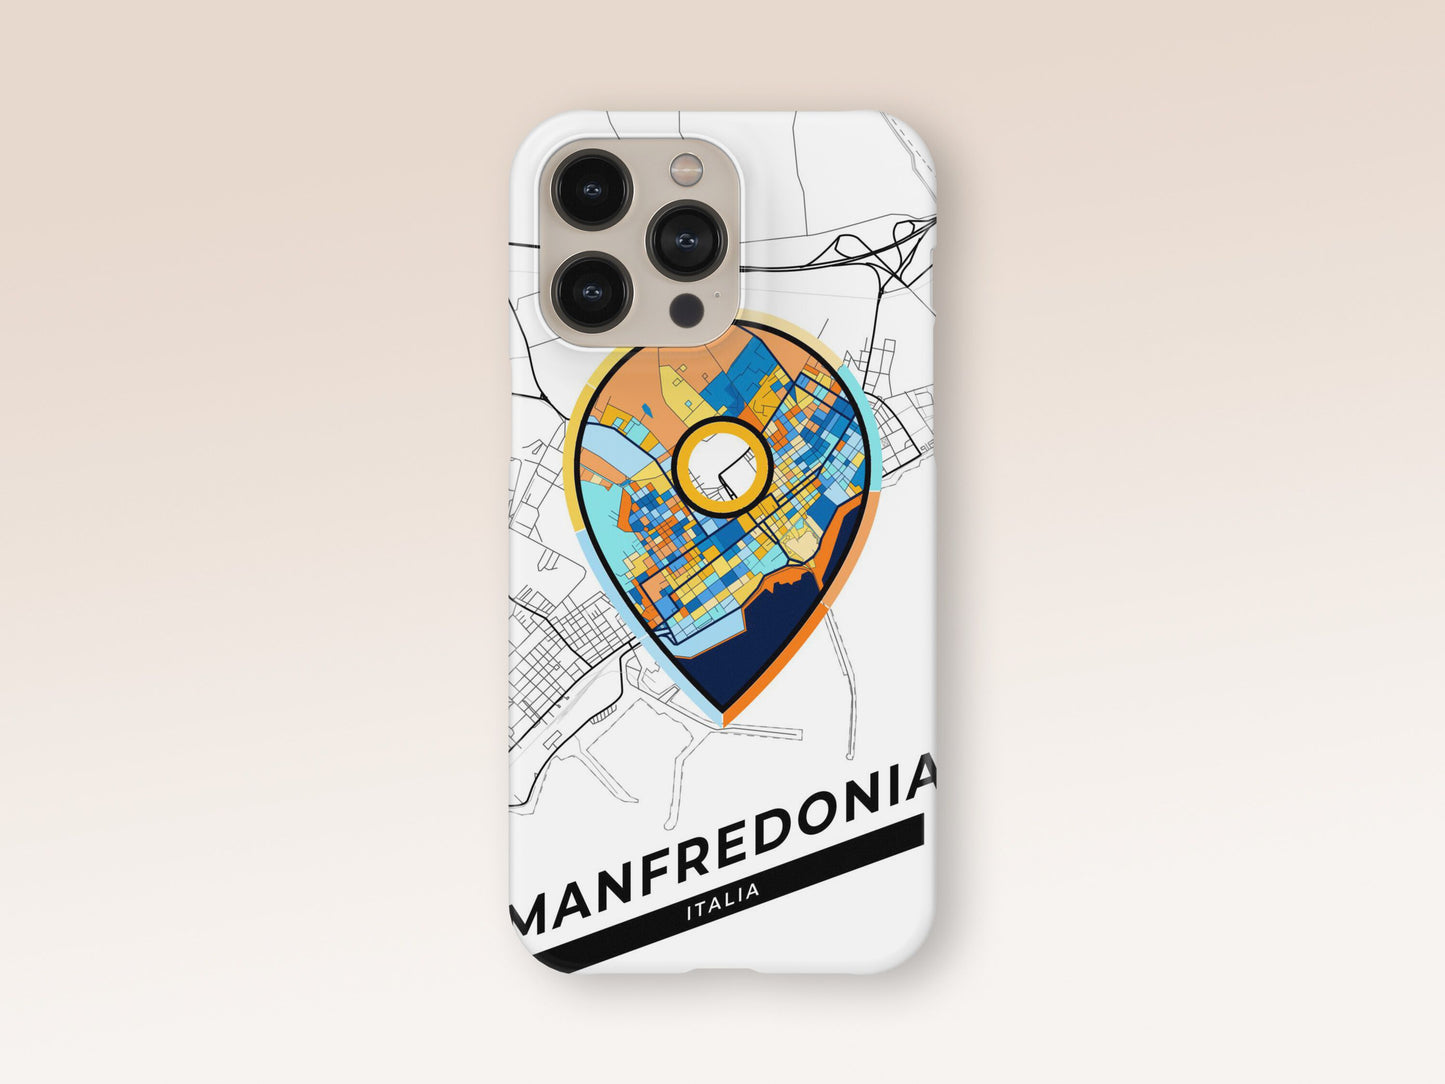 Manfredonia Italy slim phone case with colorful icon. Birthday, wedding or housewarming gift. Couple match cases. 1